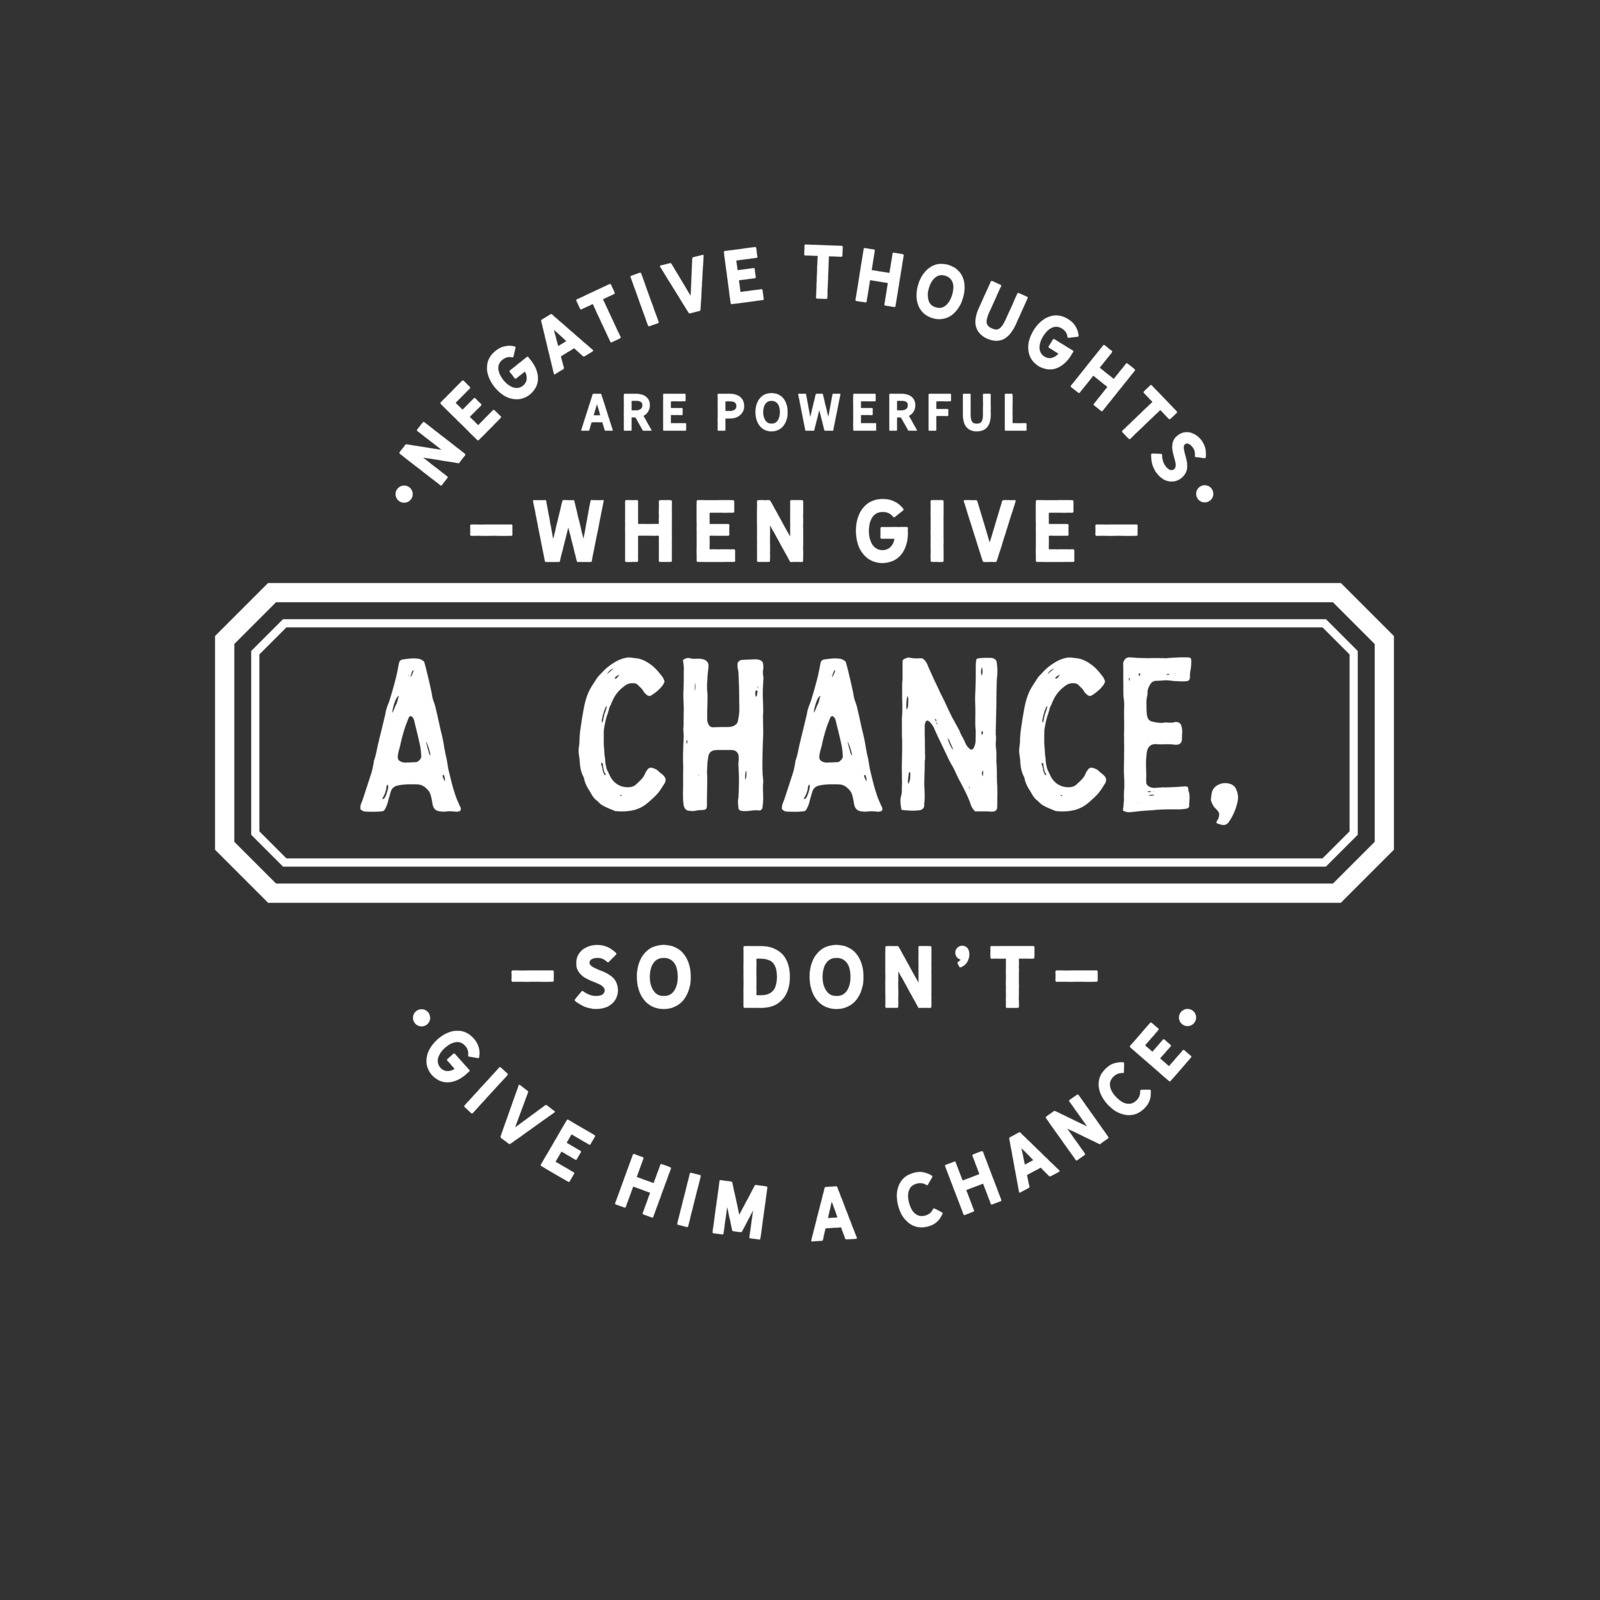 Negative thoughts are powerful when given a chance, so do not give him a chance